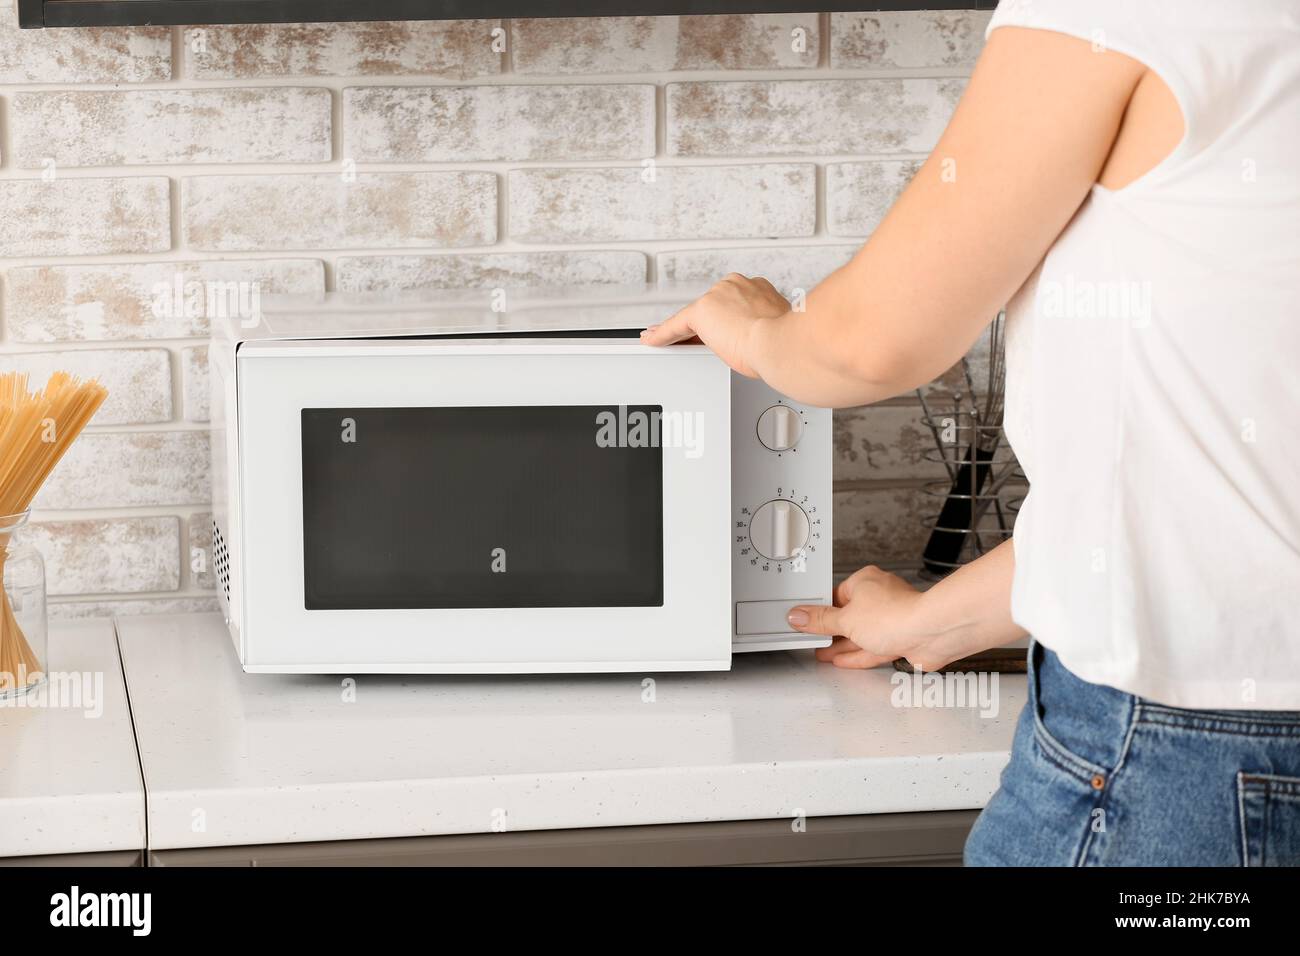 Woman using microwave oven in kitchen Stock Photo - Alamy